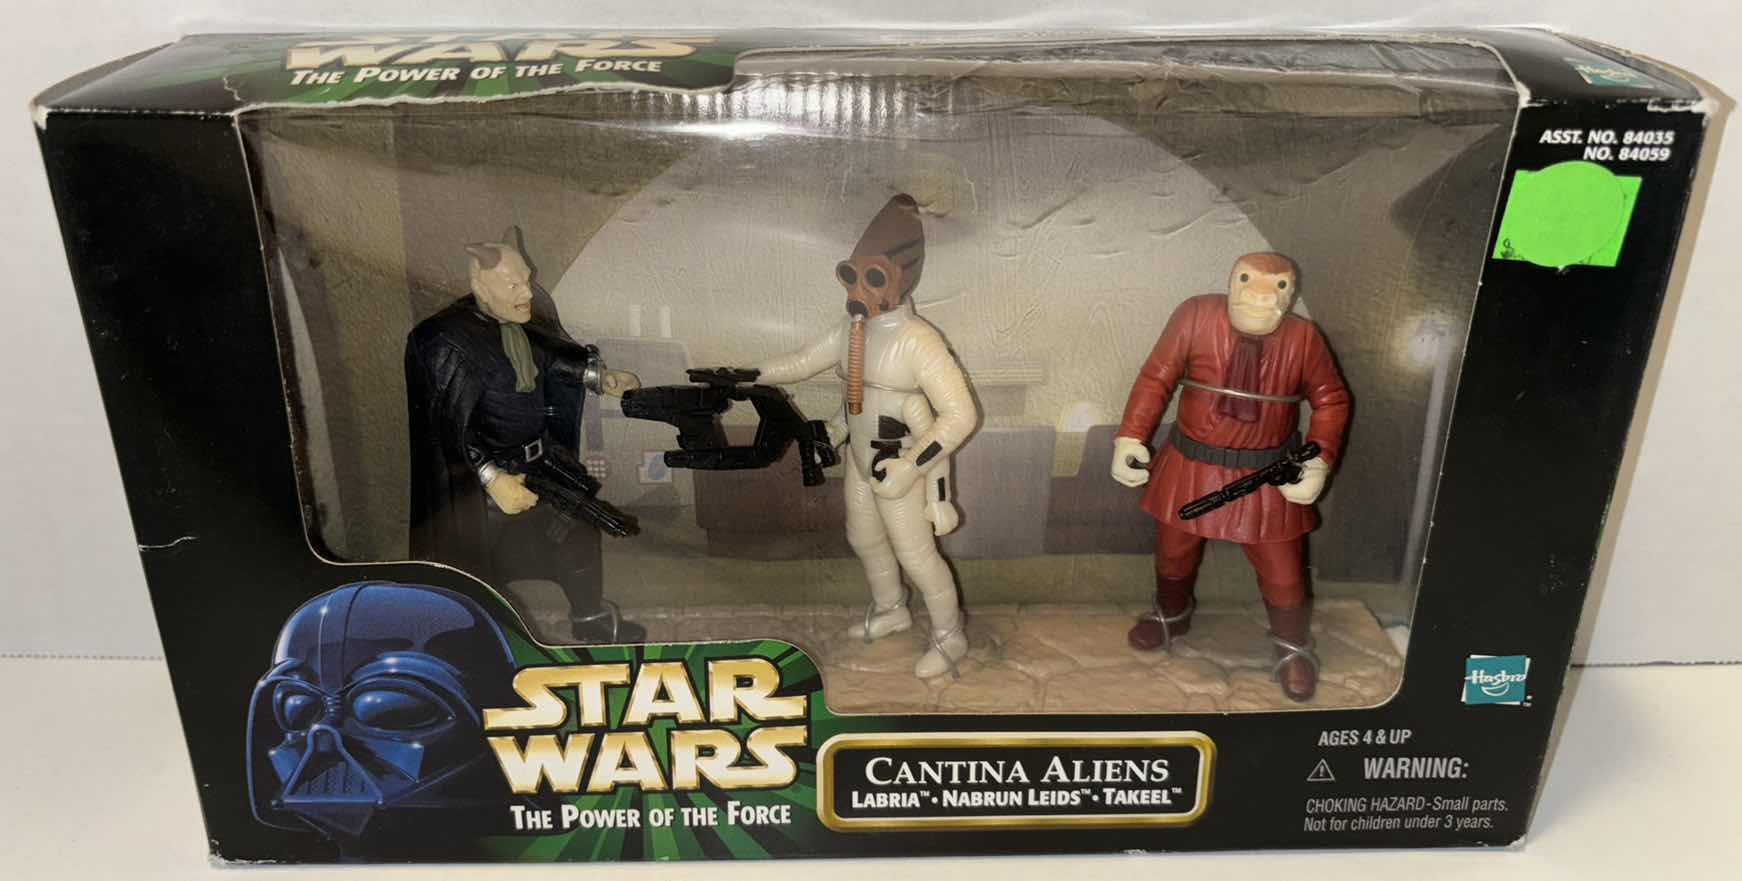 Photo 1 of NEW HASBRO 1998 STAR WARS THE POWER OF THE FORCE ACTION FIGURES & ACCESSORIES, “CANTINA ALIENS” (LABRIA, NABRUN LEIDS, TAKEEL)